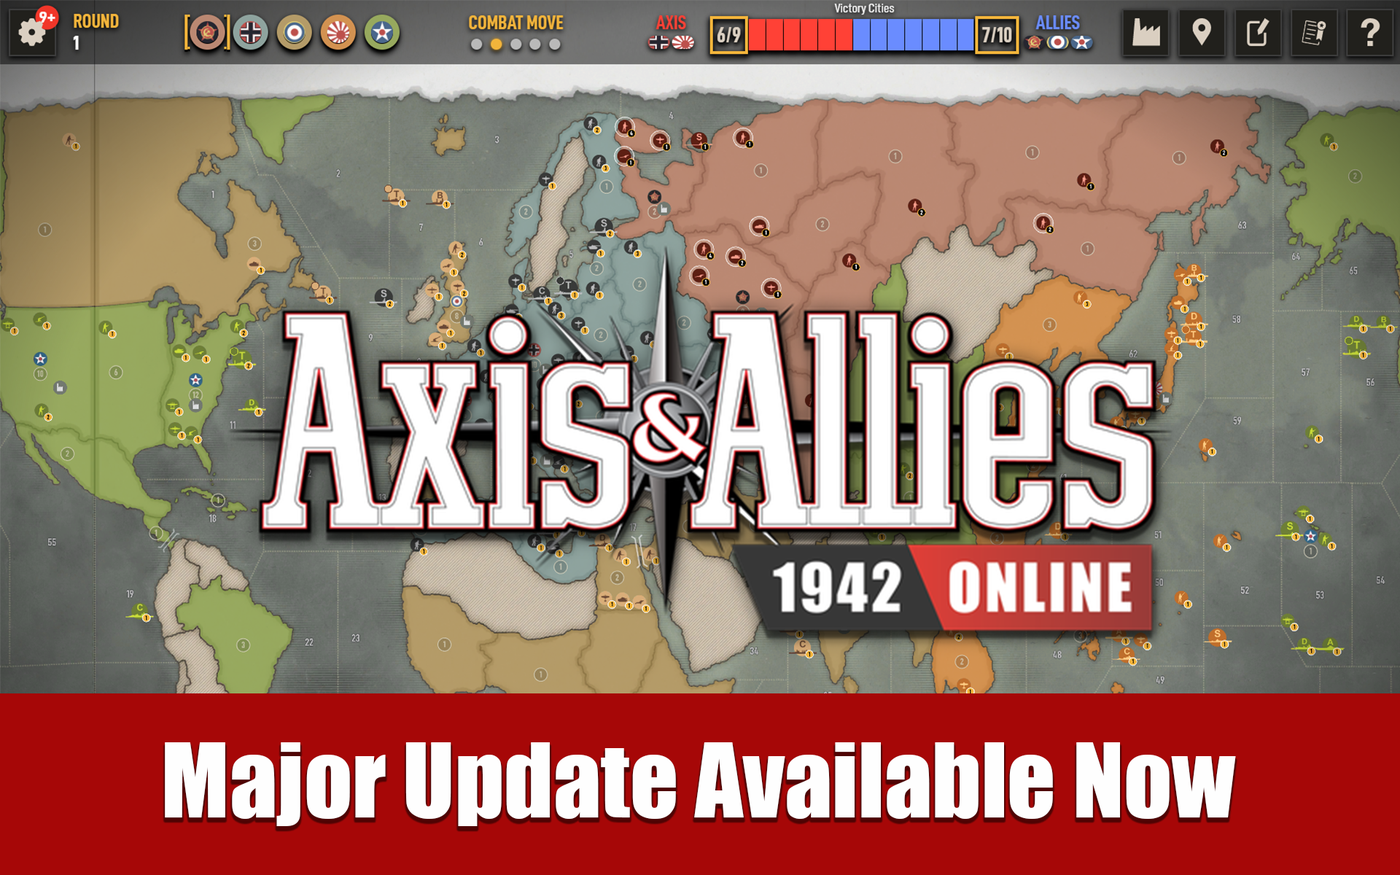 Major Update Rolls Out For Axis & Allies 1942 Online!